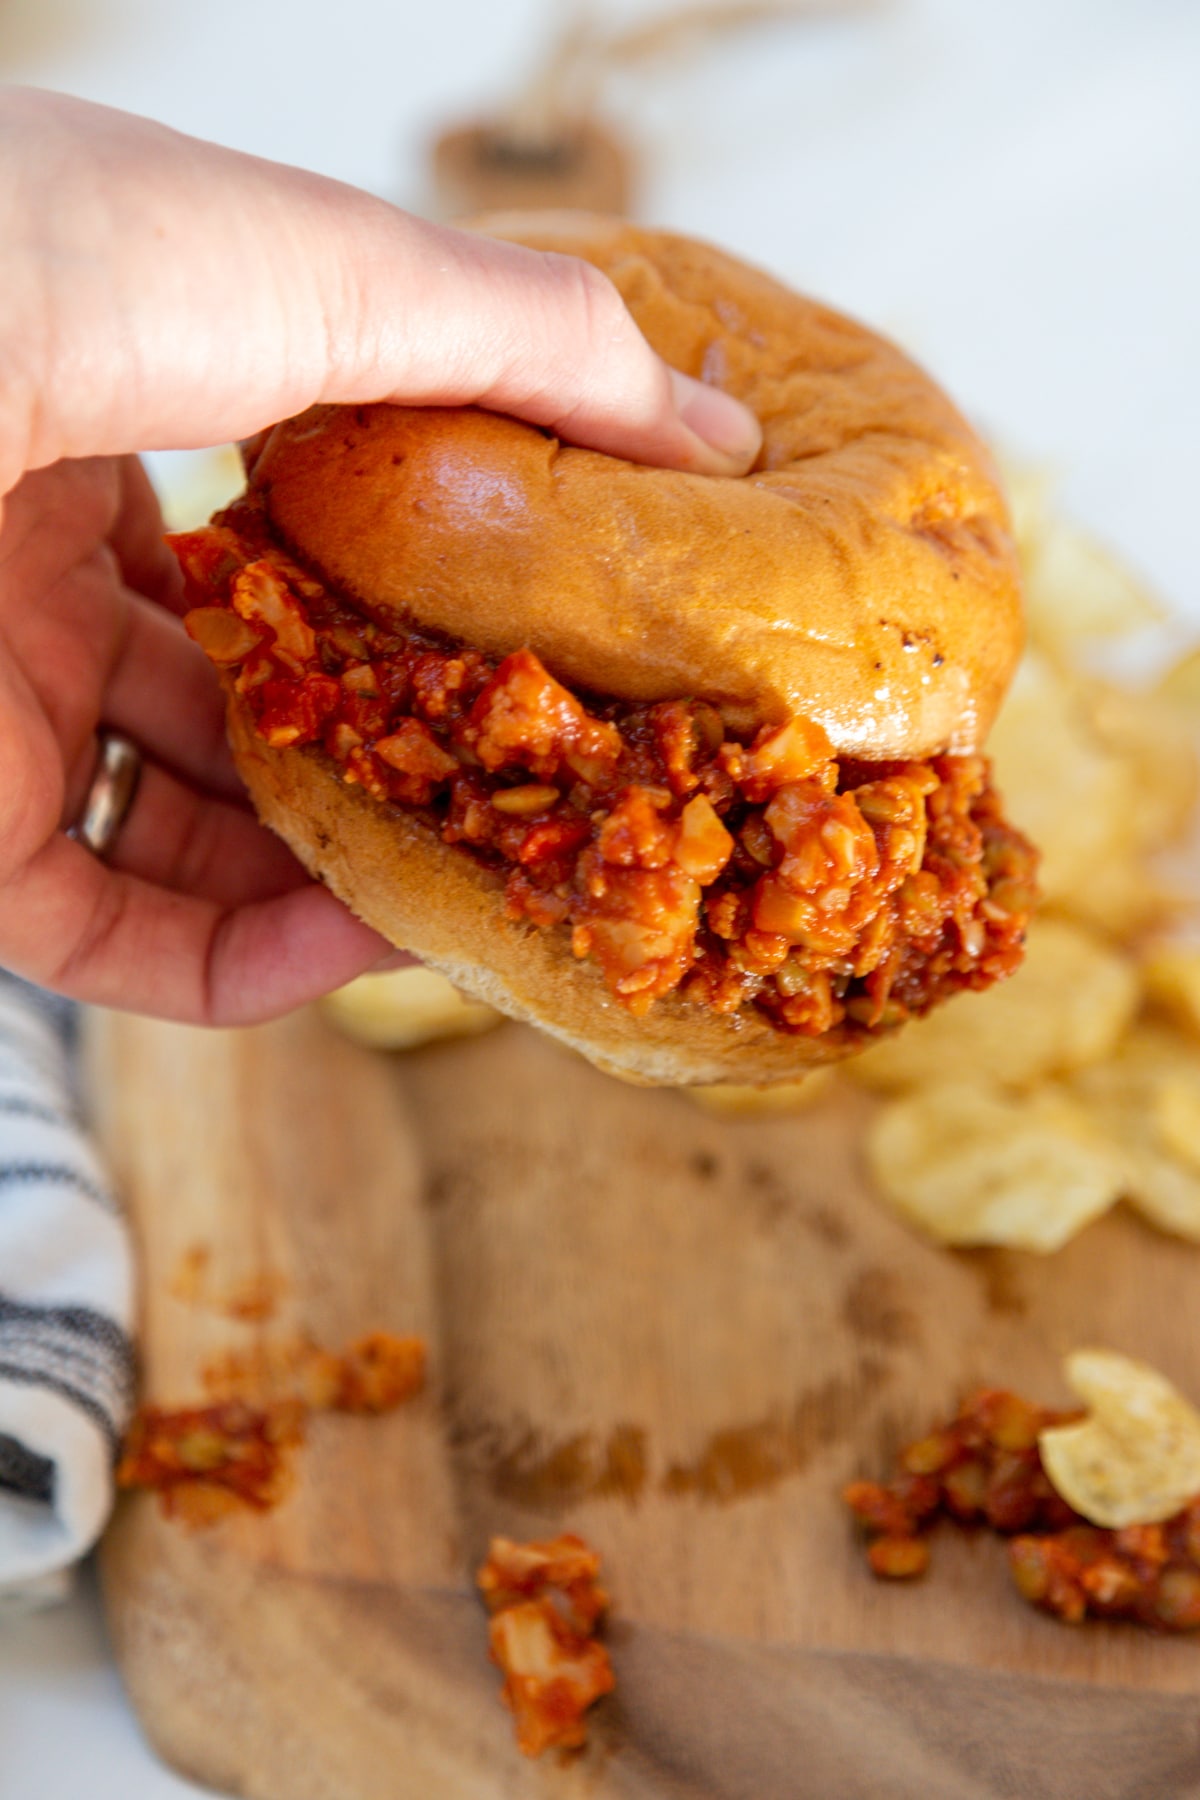 A hand holding up a sloppy Joe sandwich over a wooden board with potato chips on it.